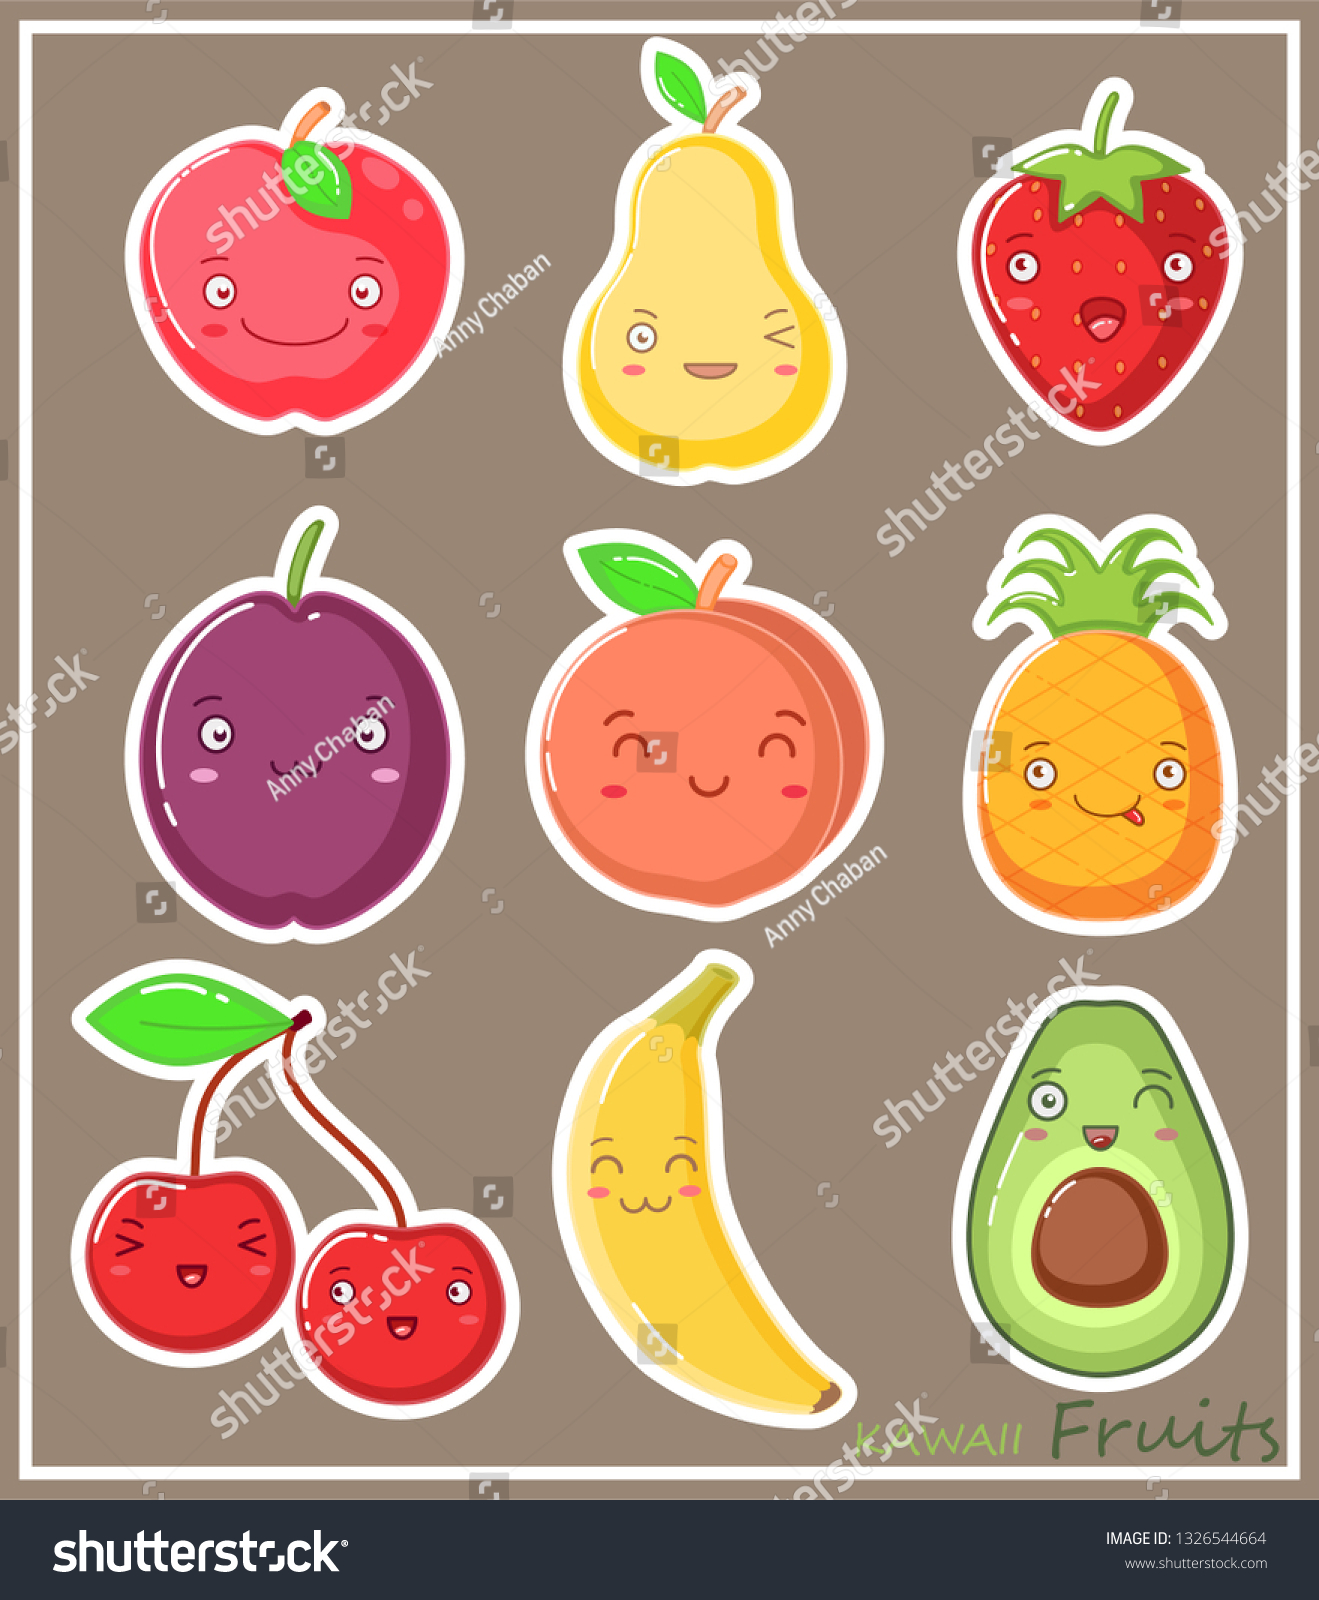 funny kawaii stickers smiling fruits stock vector royalty free 1326544664 https www shutterstock com image vector funny kawaii stickers smiling fruits 1326544664